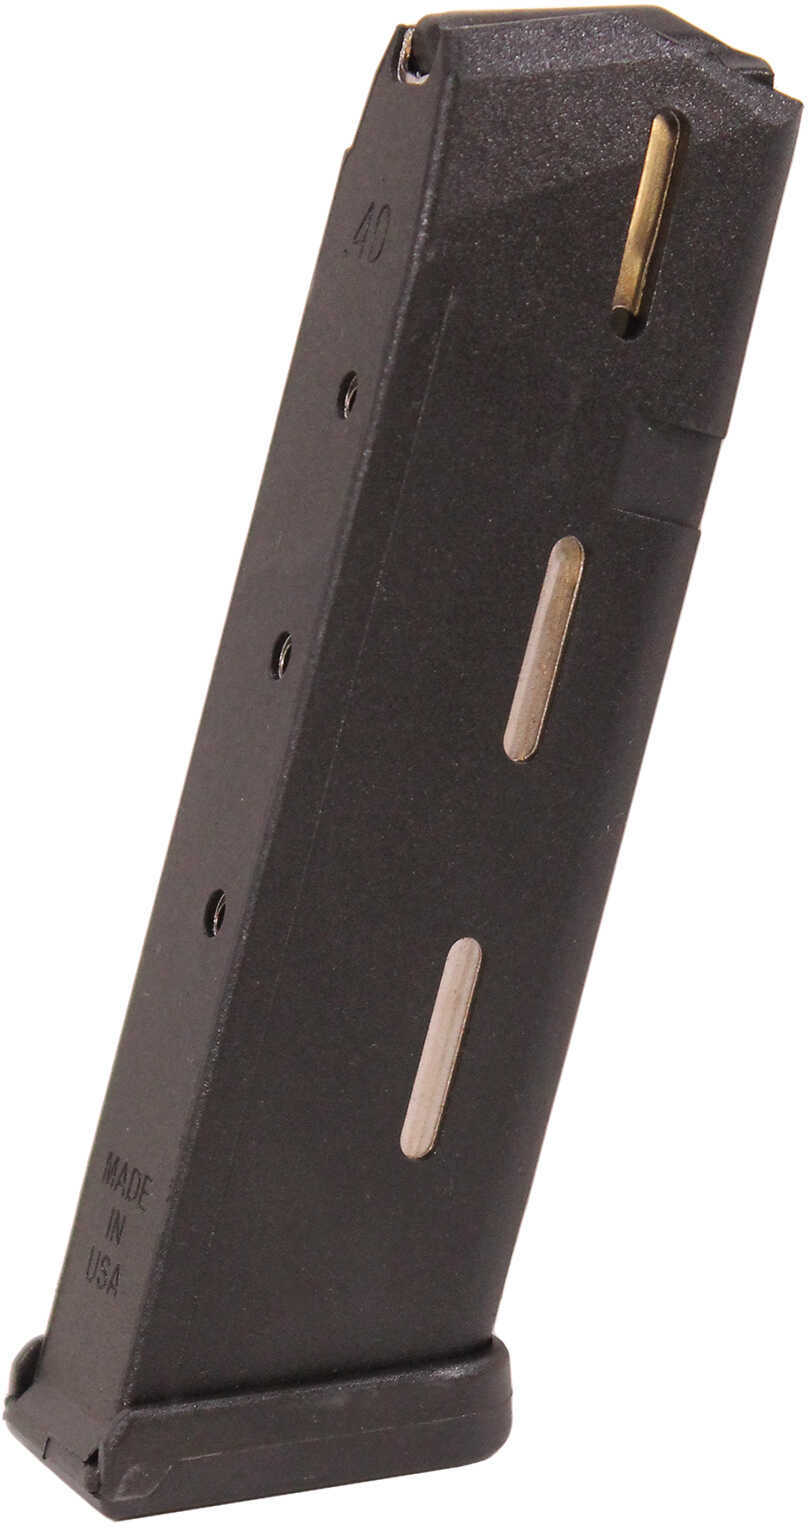 ProMag for Glock Magazine Model 22/23/27, .40 Smith & Wesson, 10 Rounds, Black Polymer